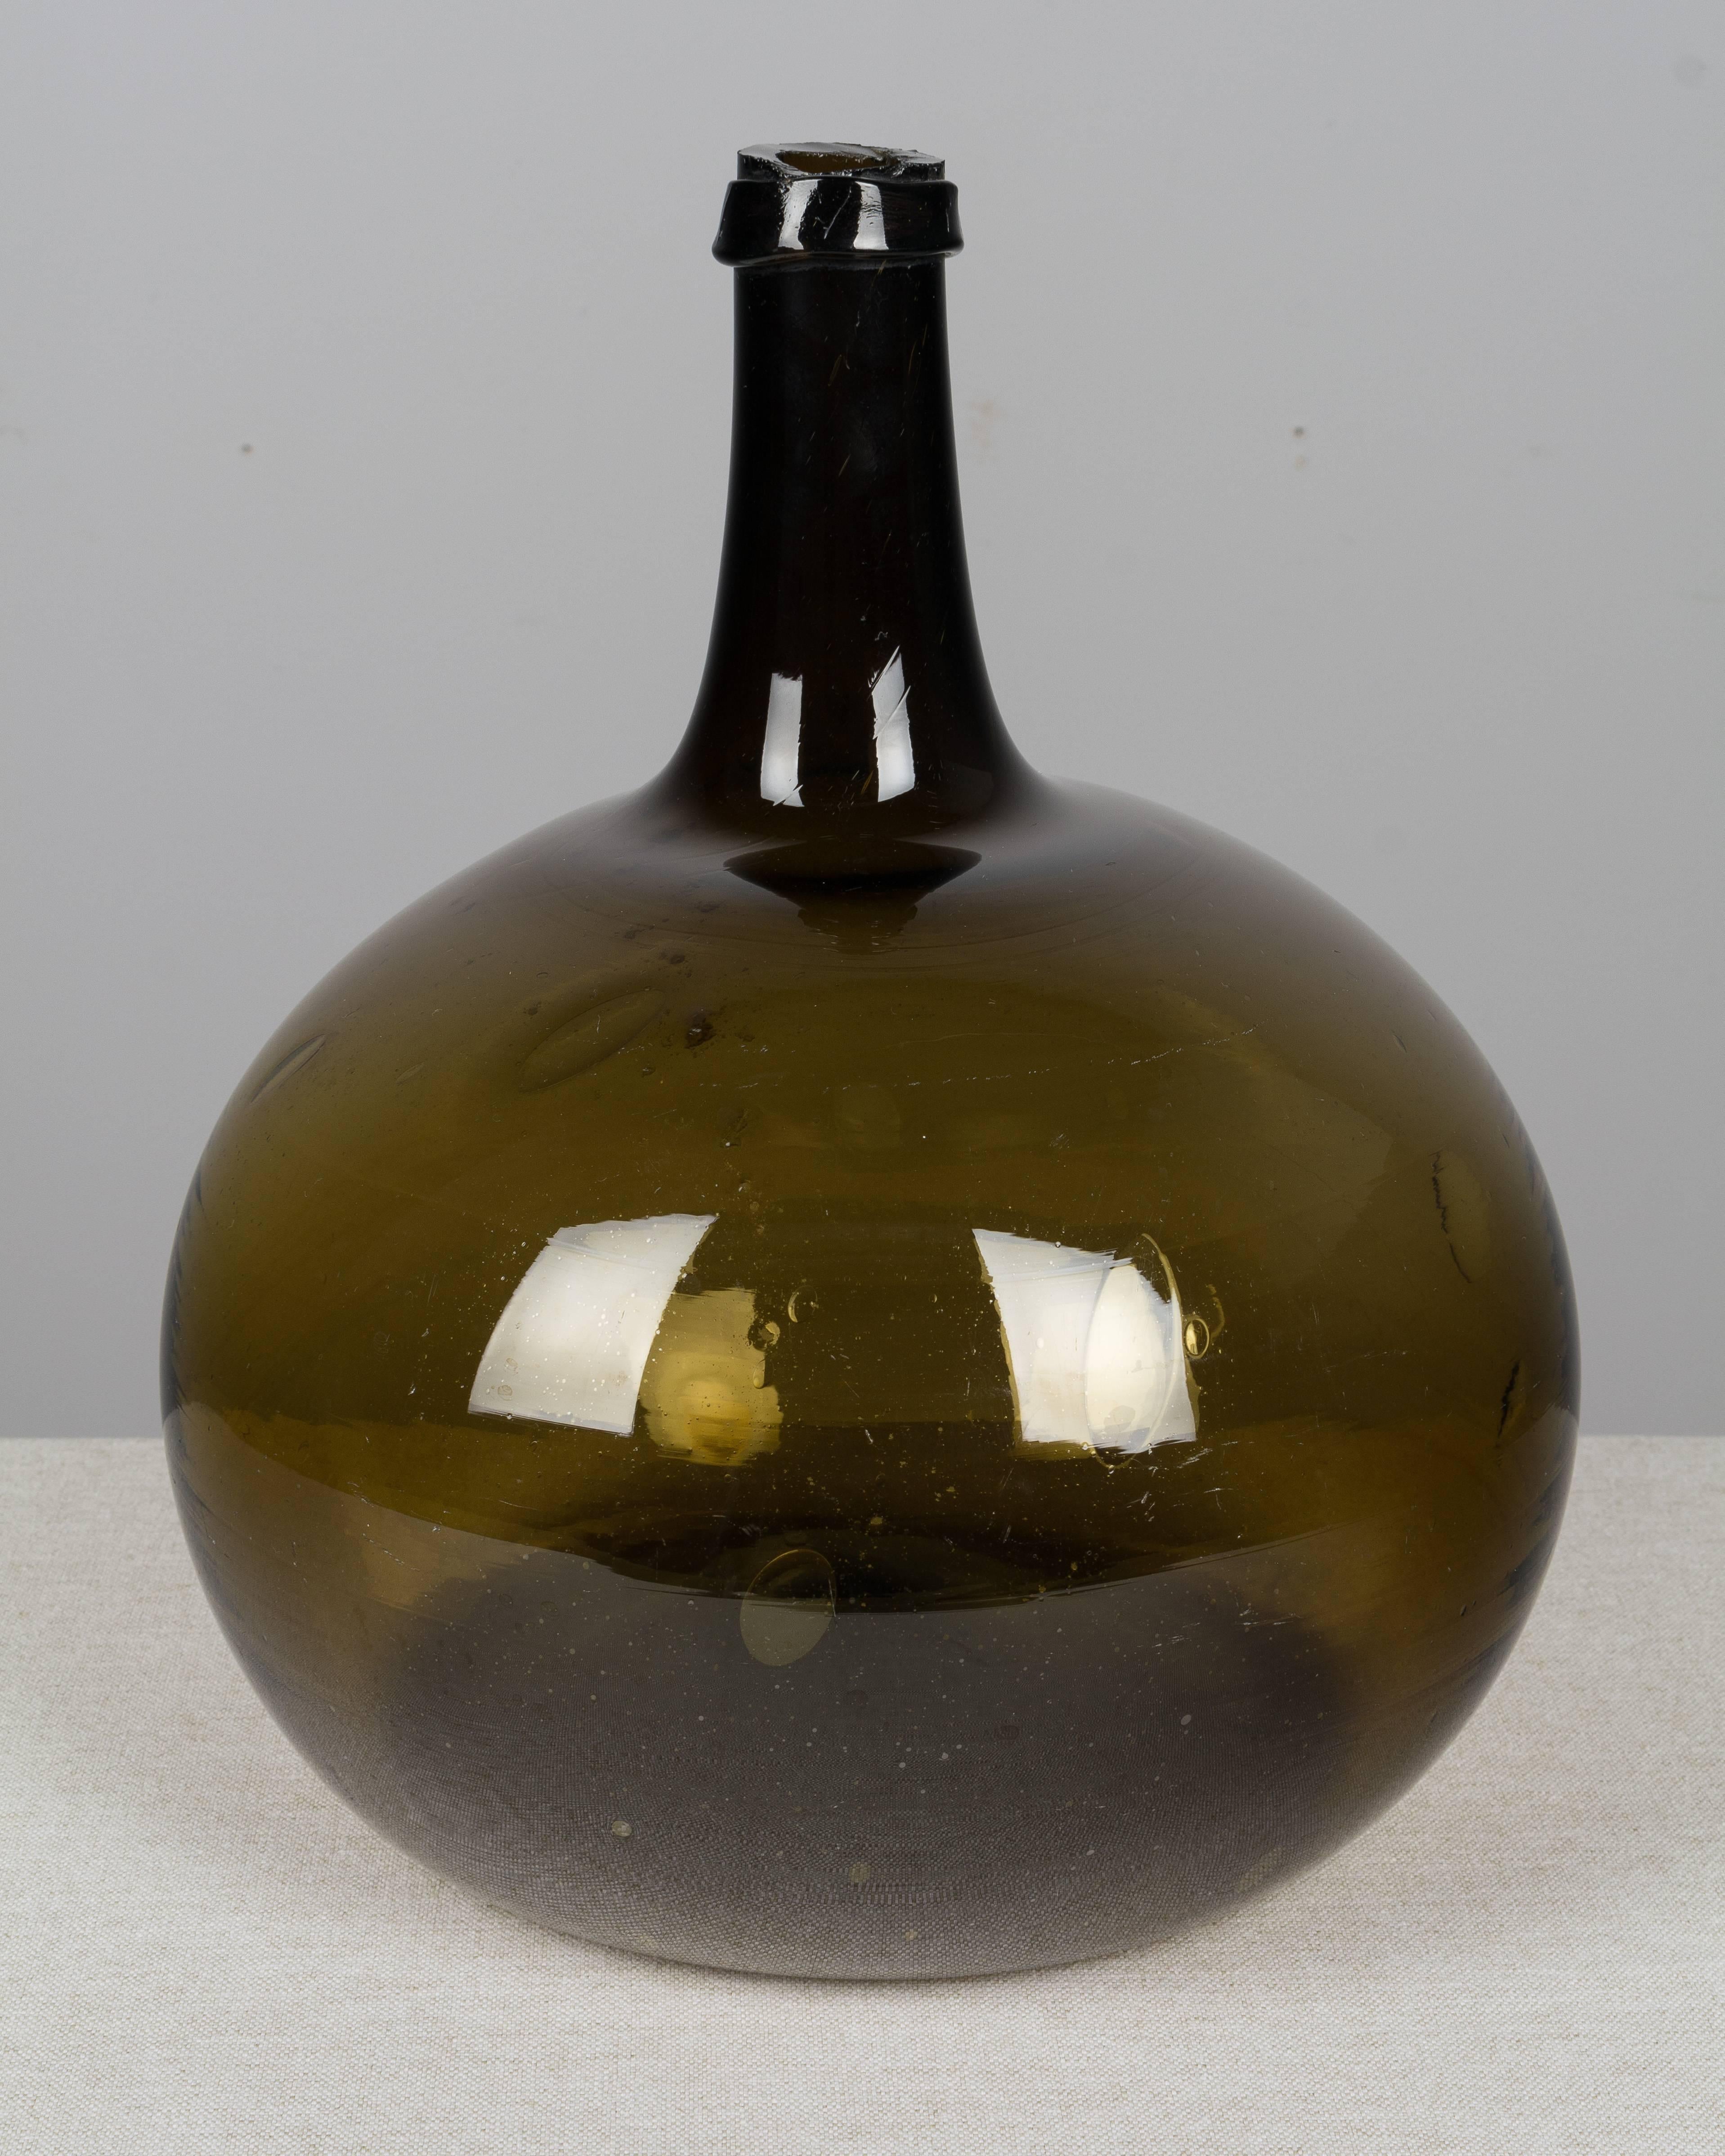 A 19th century French globular form demijohn bottle with air bubbles typical of handblown glass.  We have two other bottles in a darker brown color.Please refer to photos for more details. We have a large selection of French antiques at Olivier